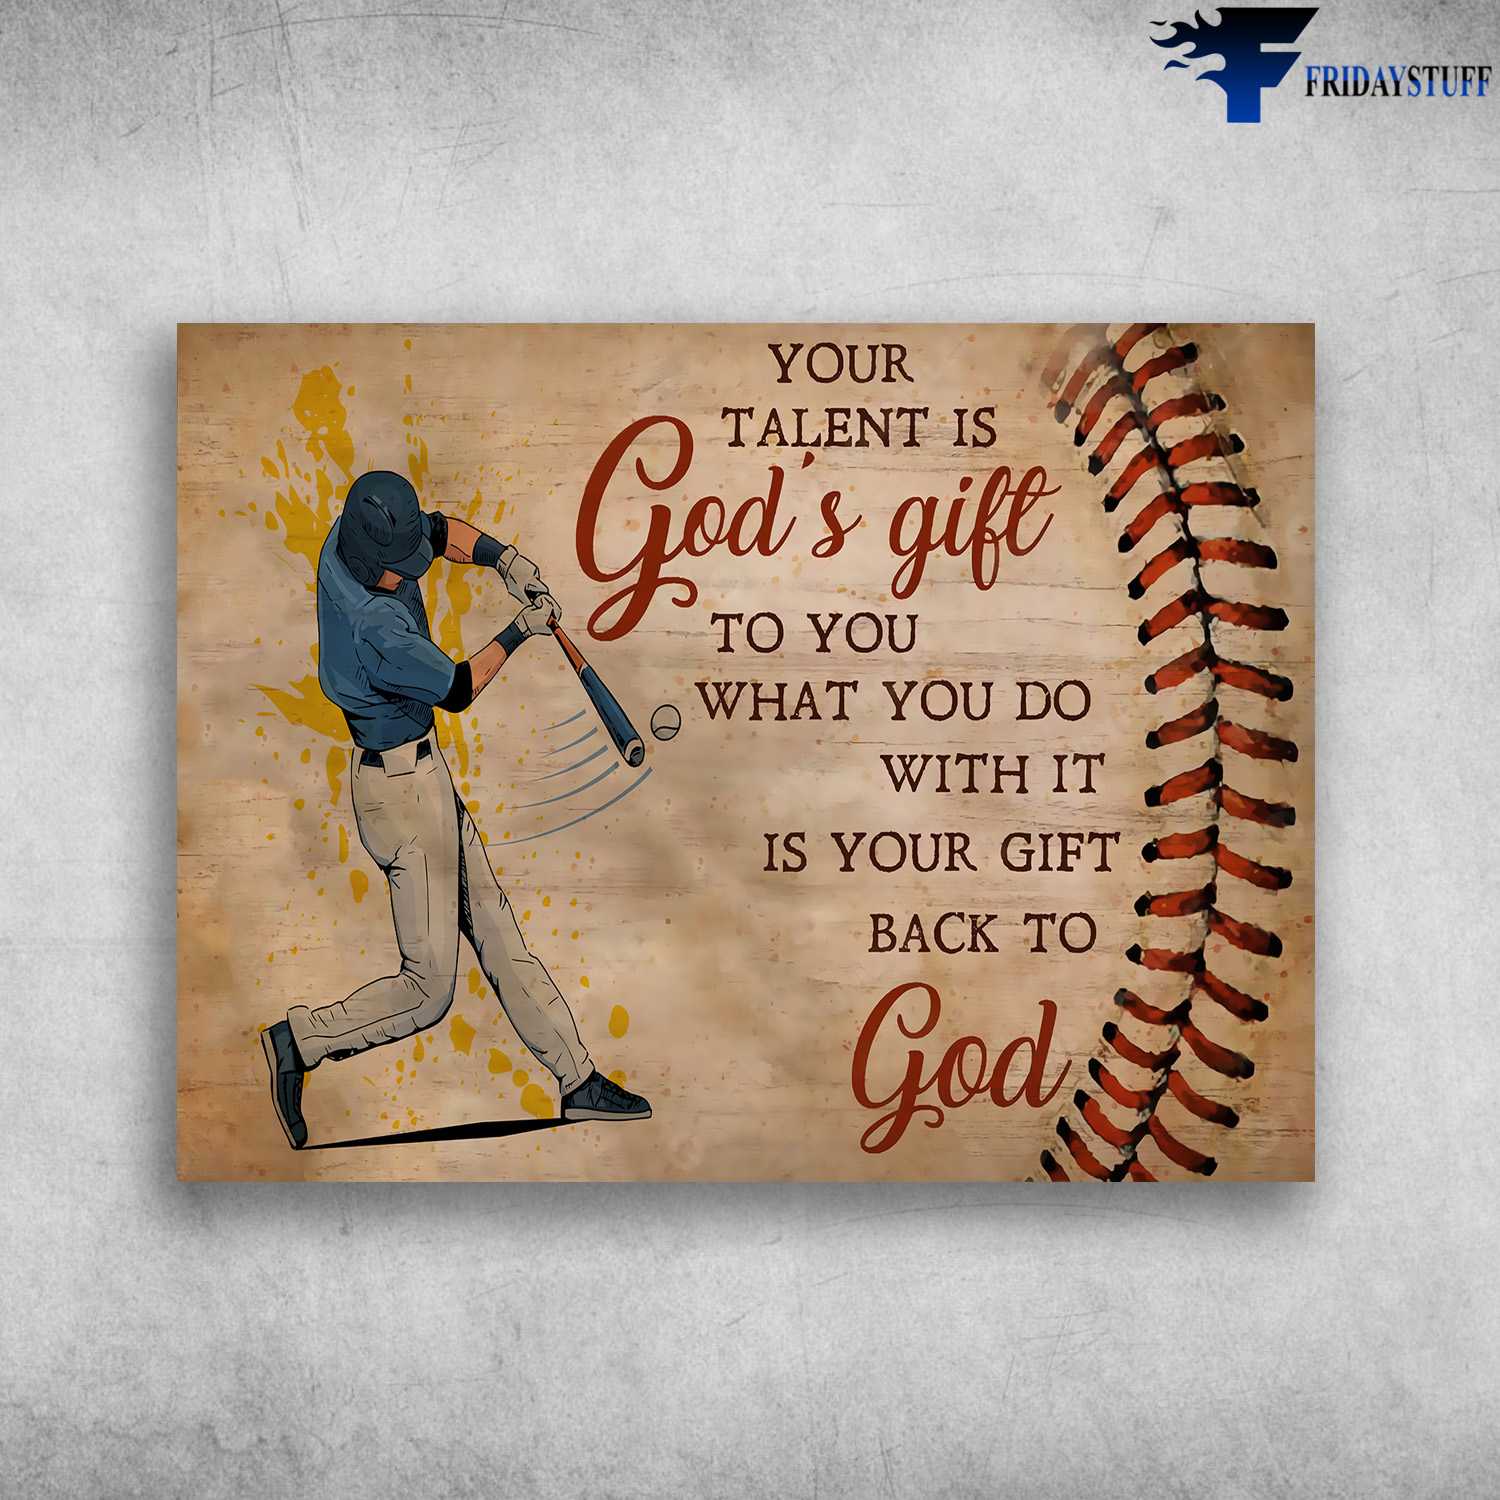 Baseball Player, Baseball Poster, Your Talent Is God's Gift To You, What You Do With It, Is Your Gift Back To God